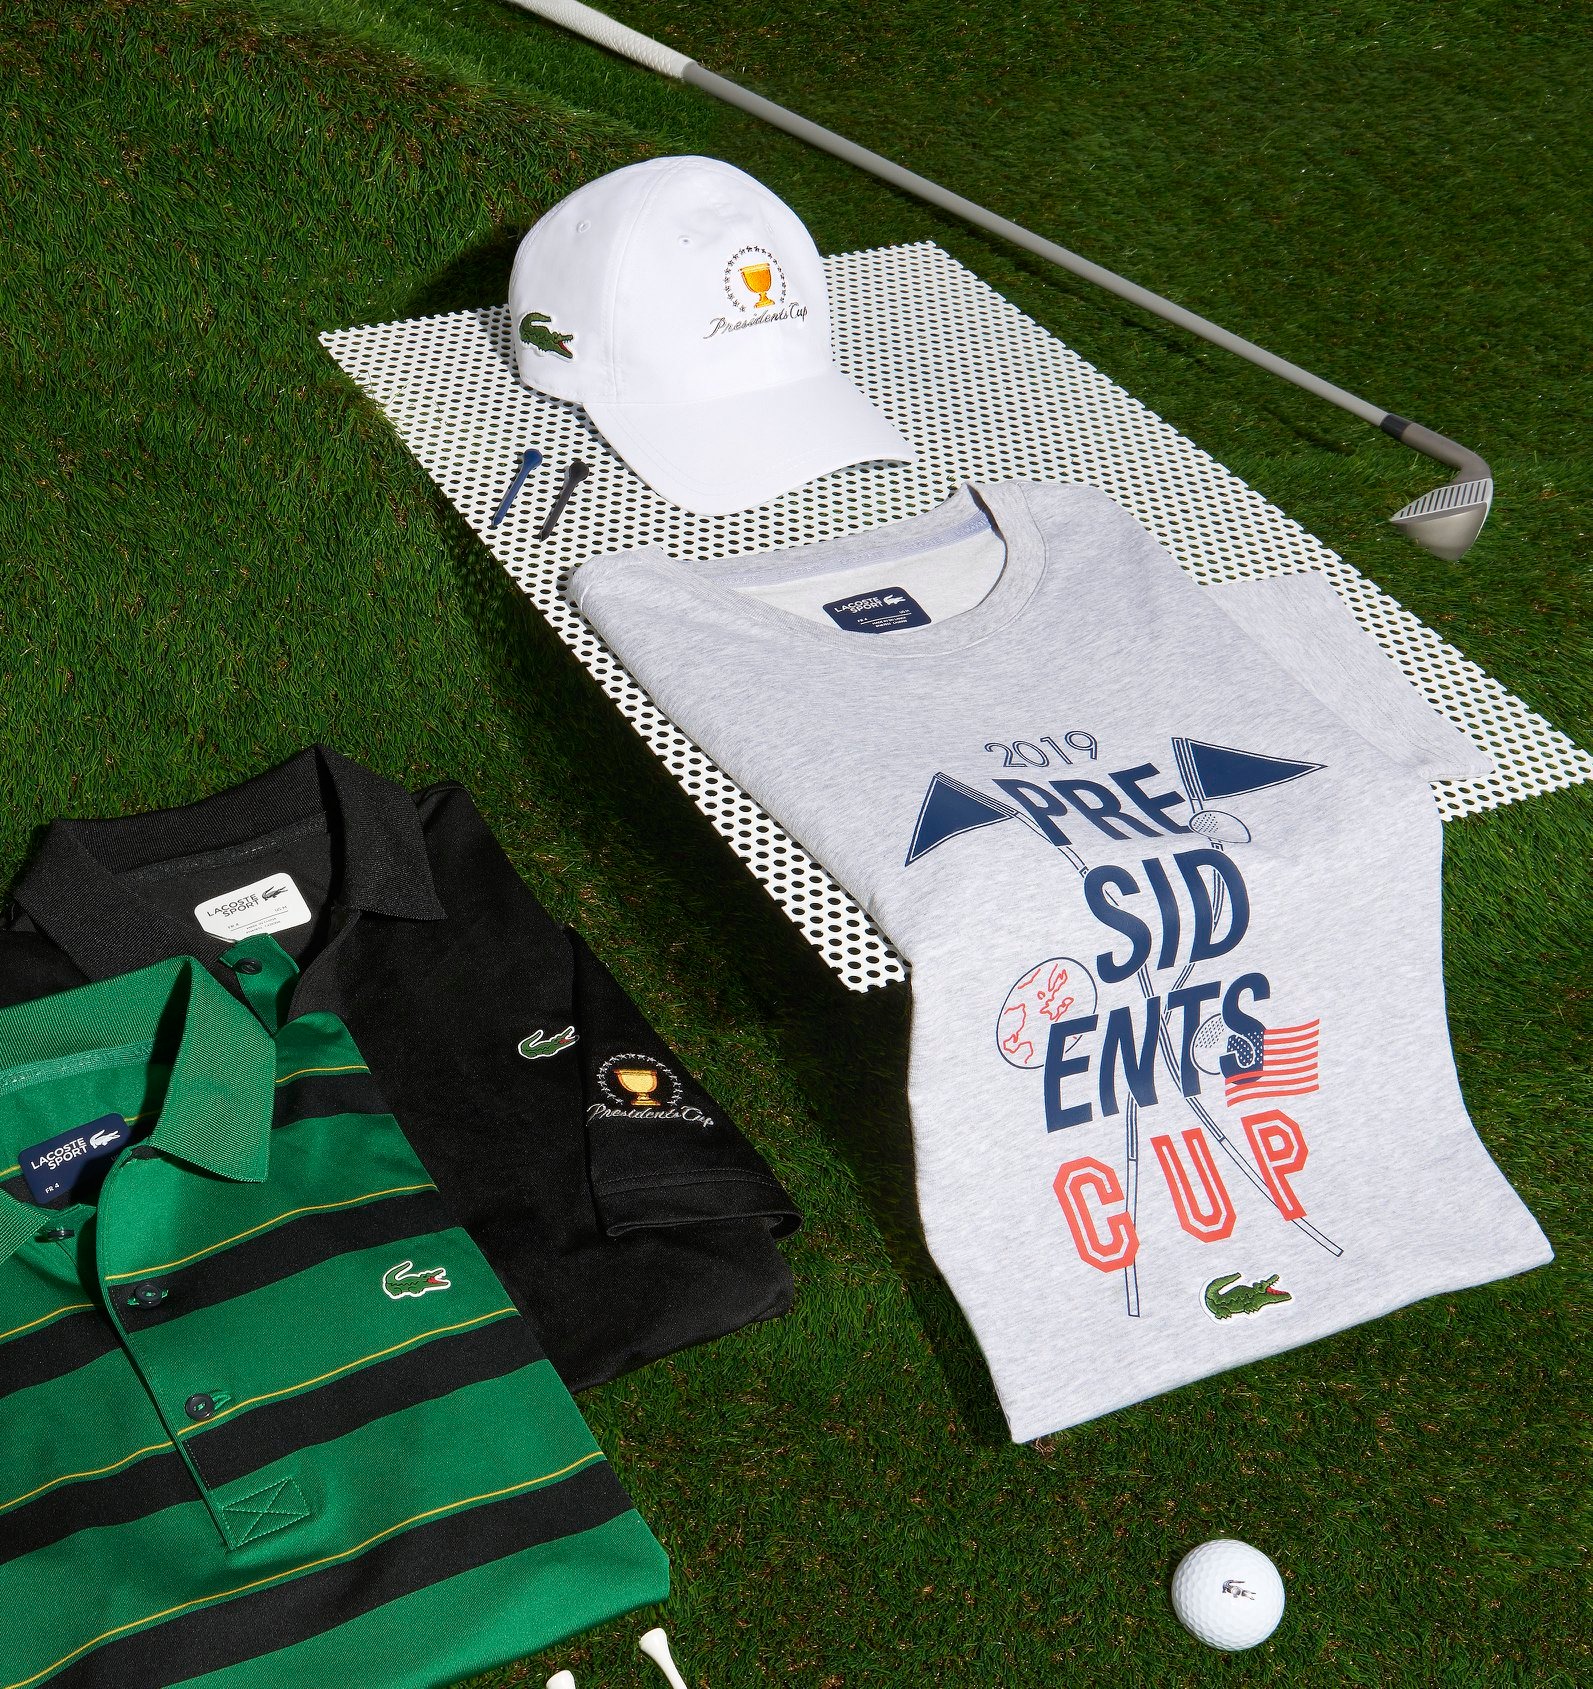 Every fan of golf deserves the best outfit for every game.